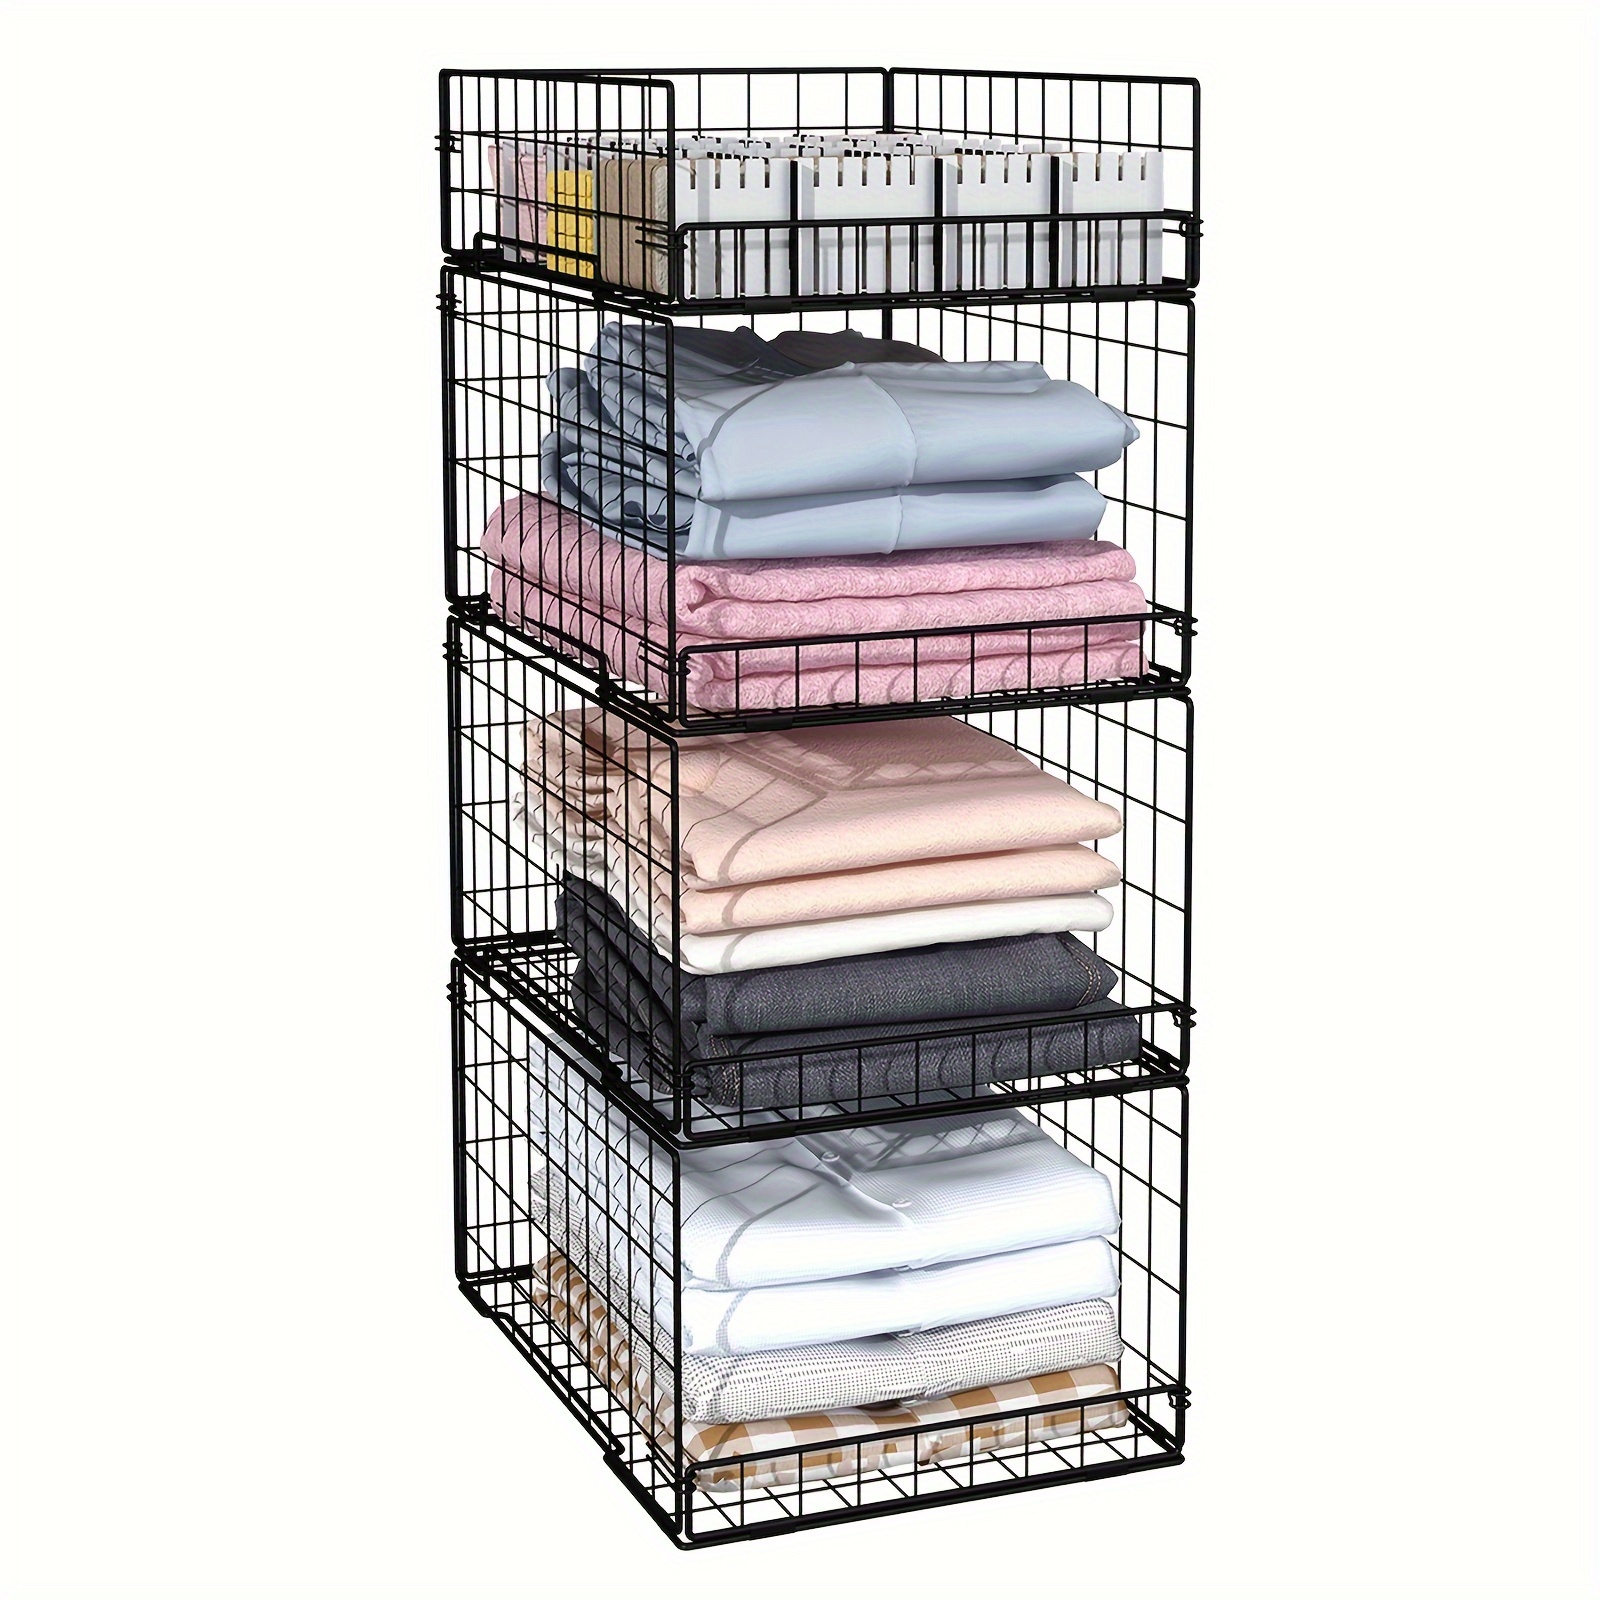 

4 Pack Closet Organizers And Storage Shelves For Clothes, Stackable Storage Bins Metal Wire Organizer Baskets Containers Drawers With Dividers For Truck Camper Rv Closet/pantries/wardrobe